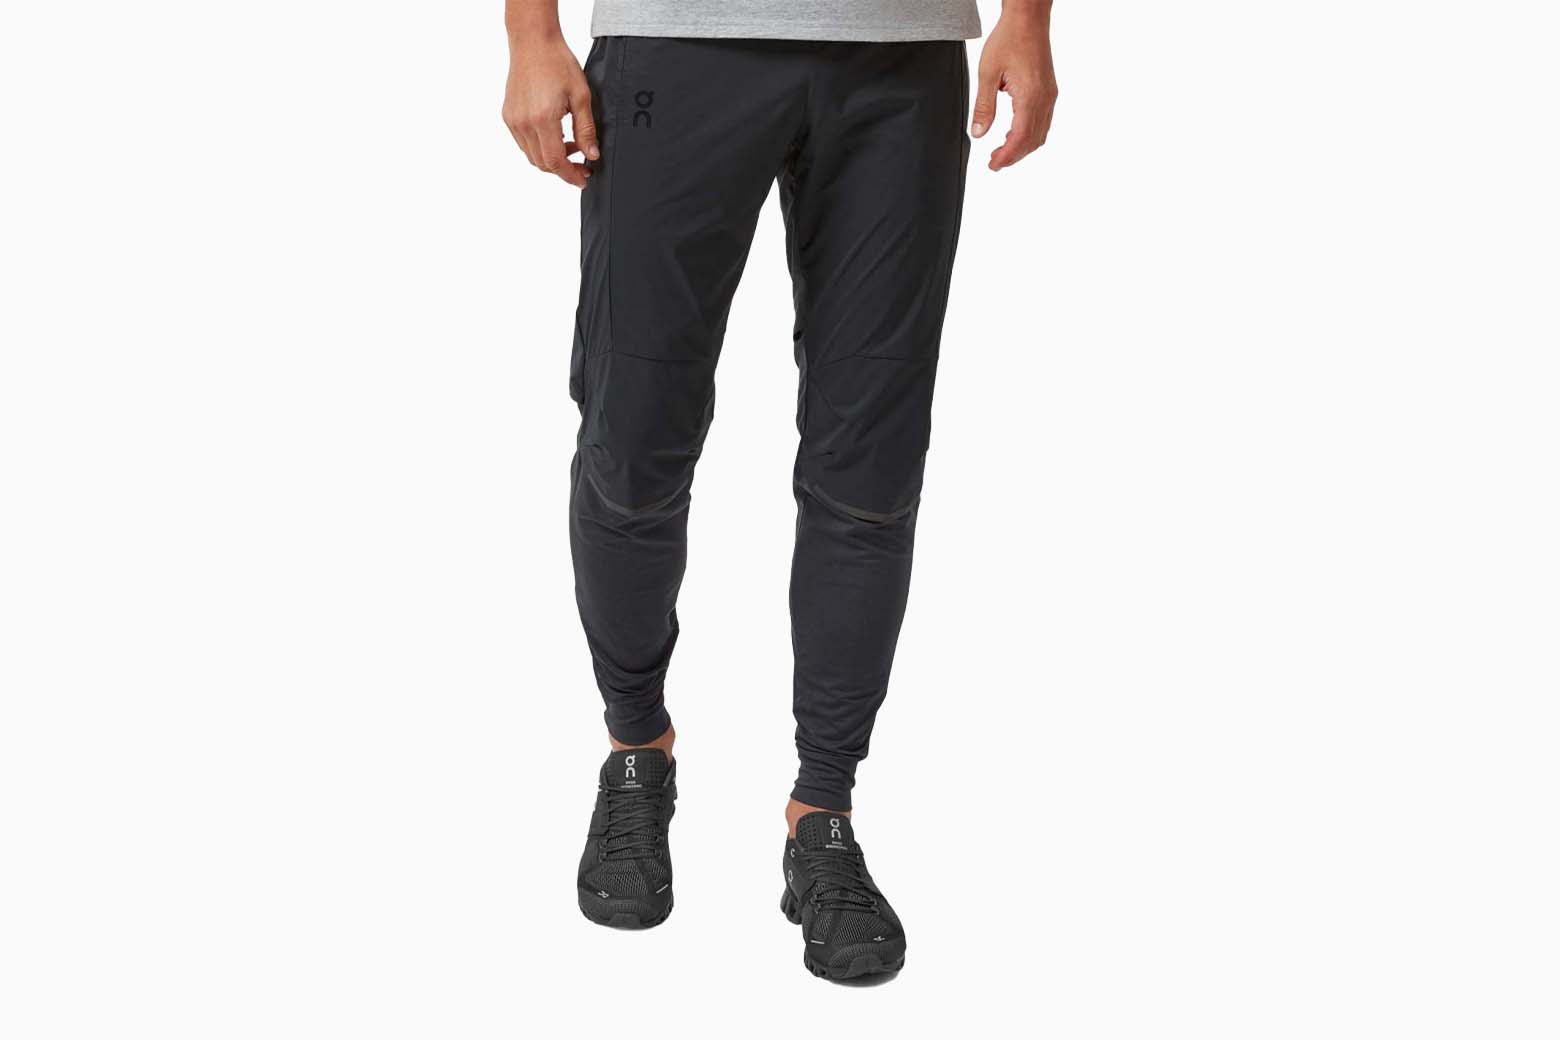 21 Best Joggers For Men That Are Stylish And Comfortable